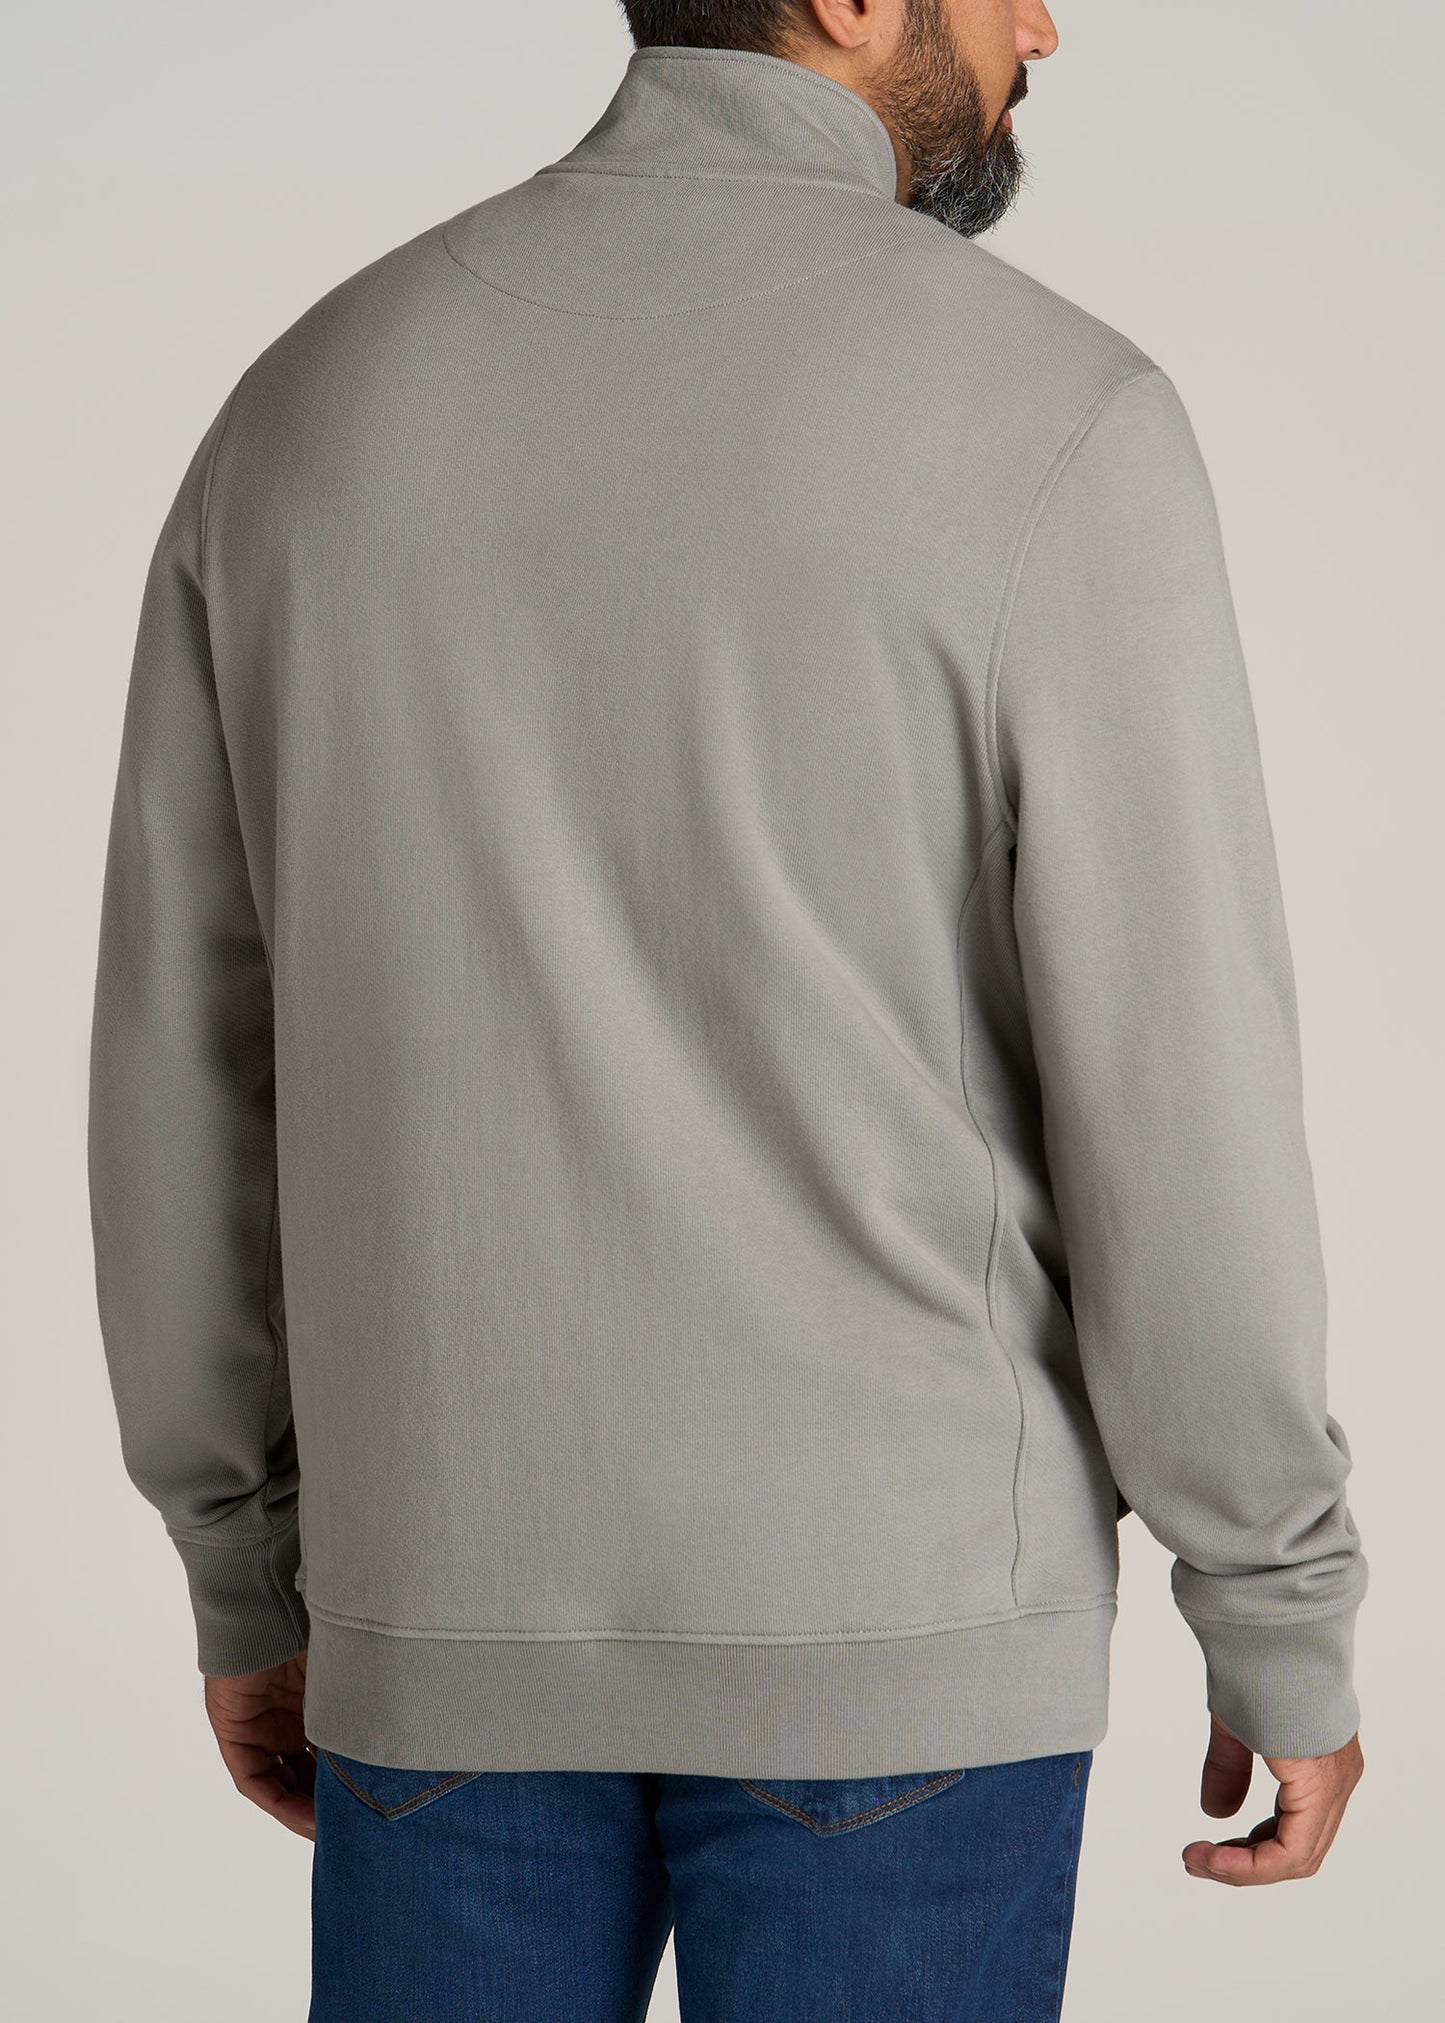 LJ-Heavyweight-French-Terry-Quarter-Zip-Pullover-Pewter-back